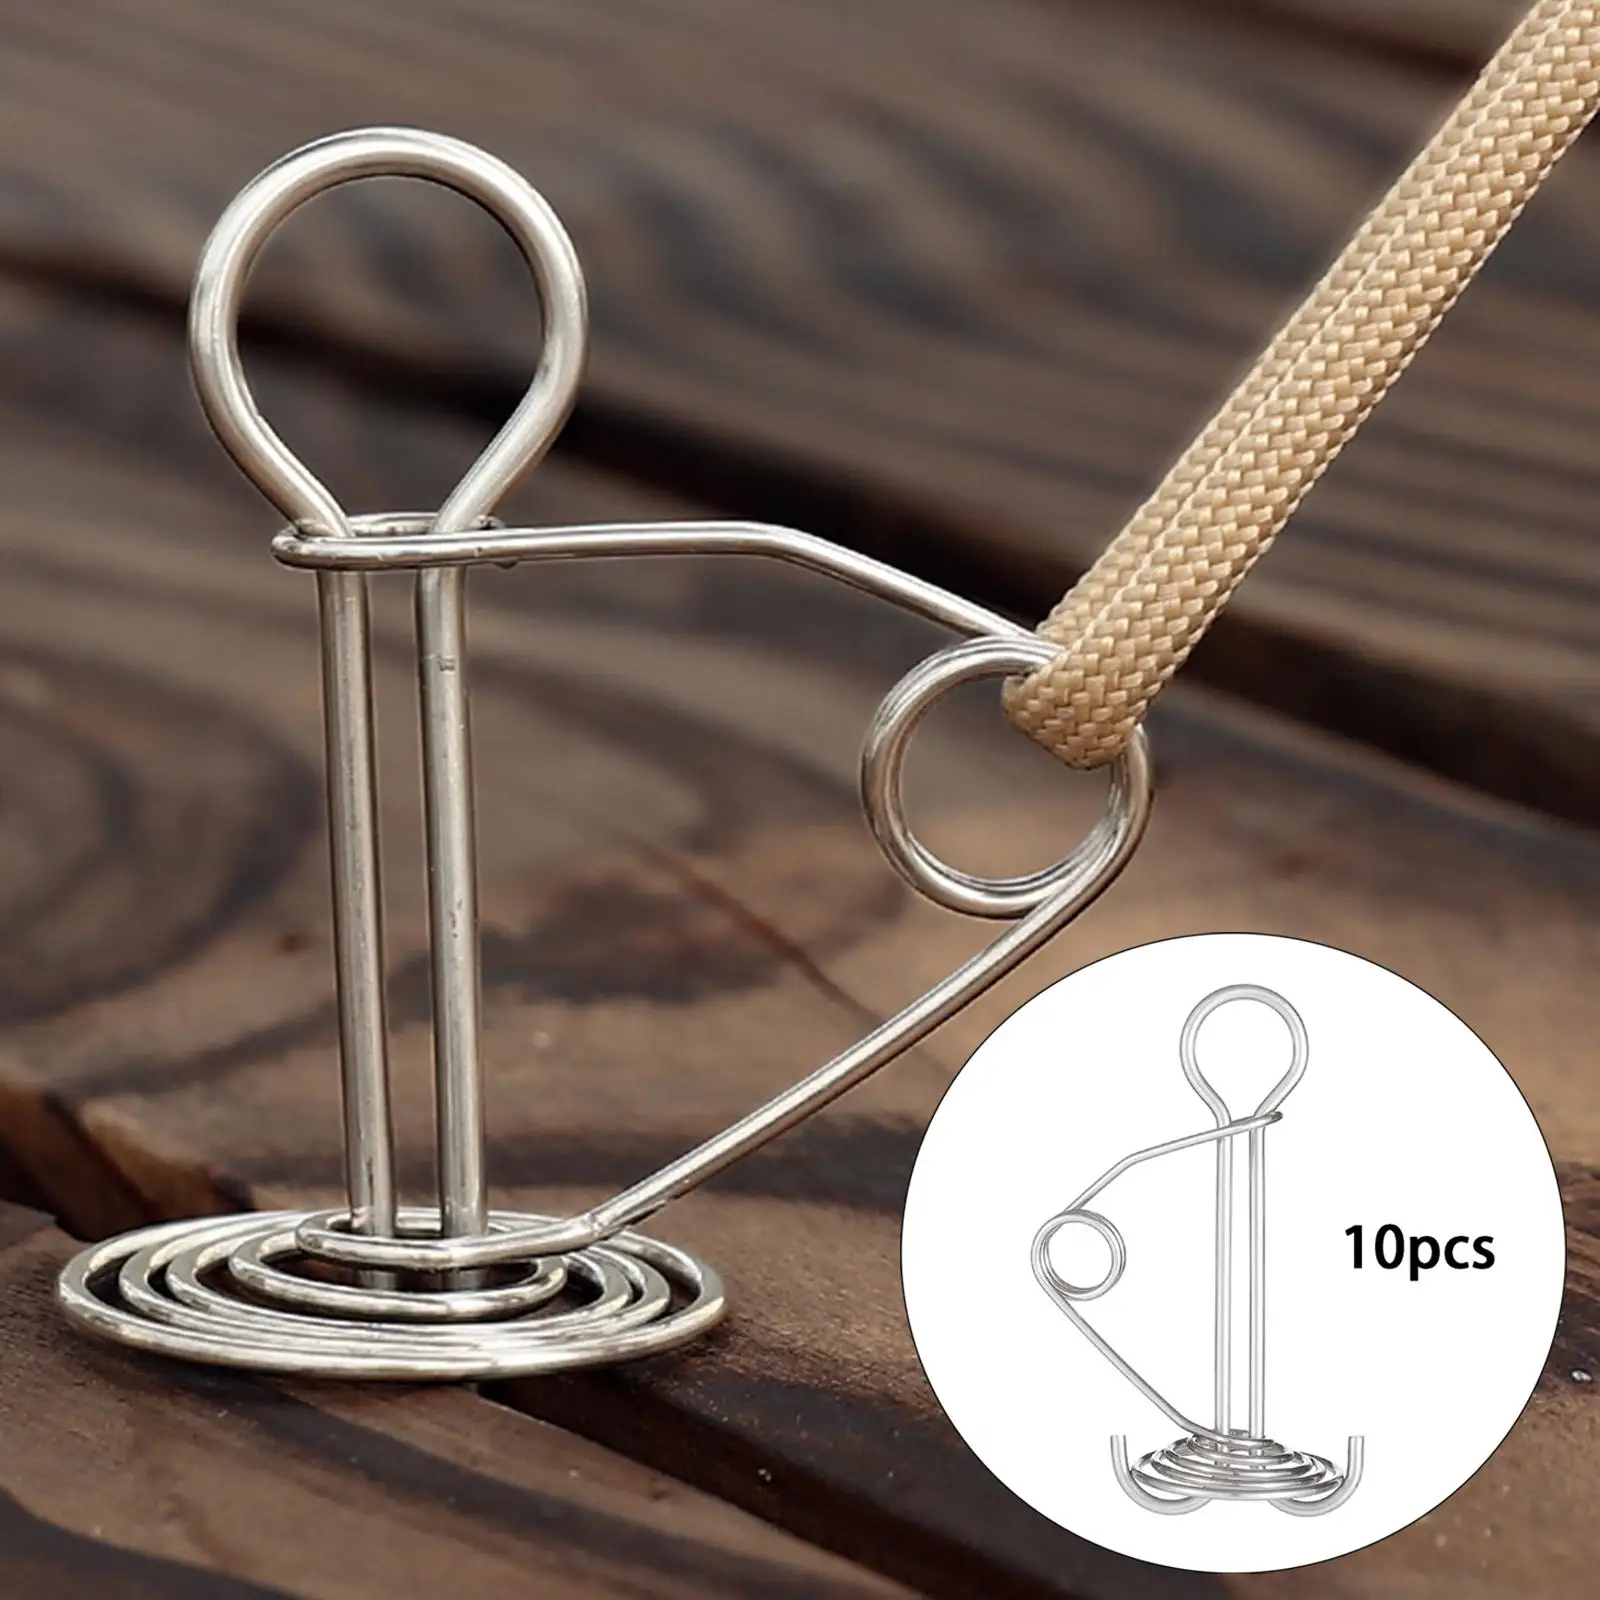 10PCS Stainless Steel Spring Octopus Deck Peg Spiral Shaped Durable Rope Buckle Tent Hooks Board Pegs for Camping Hiking